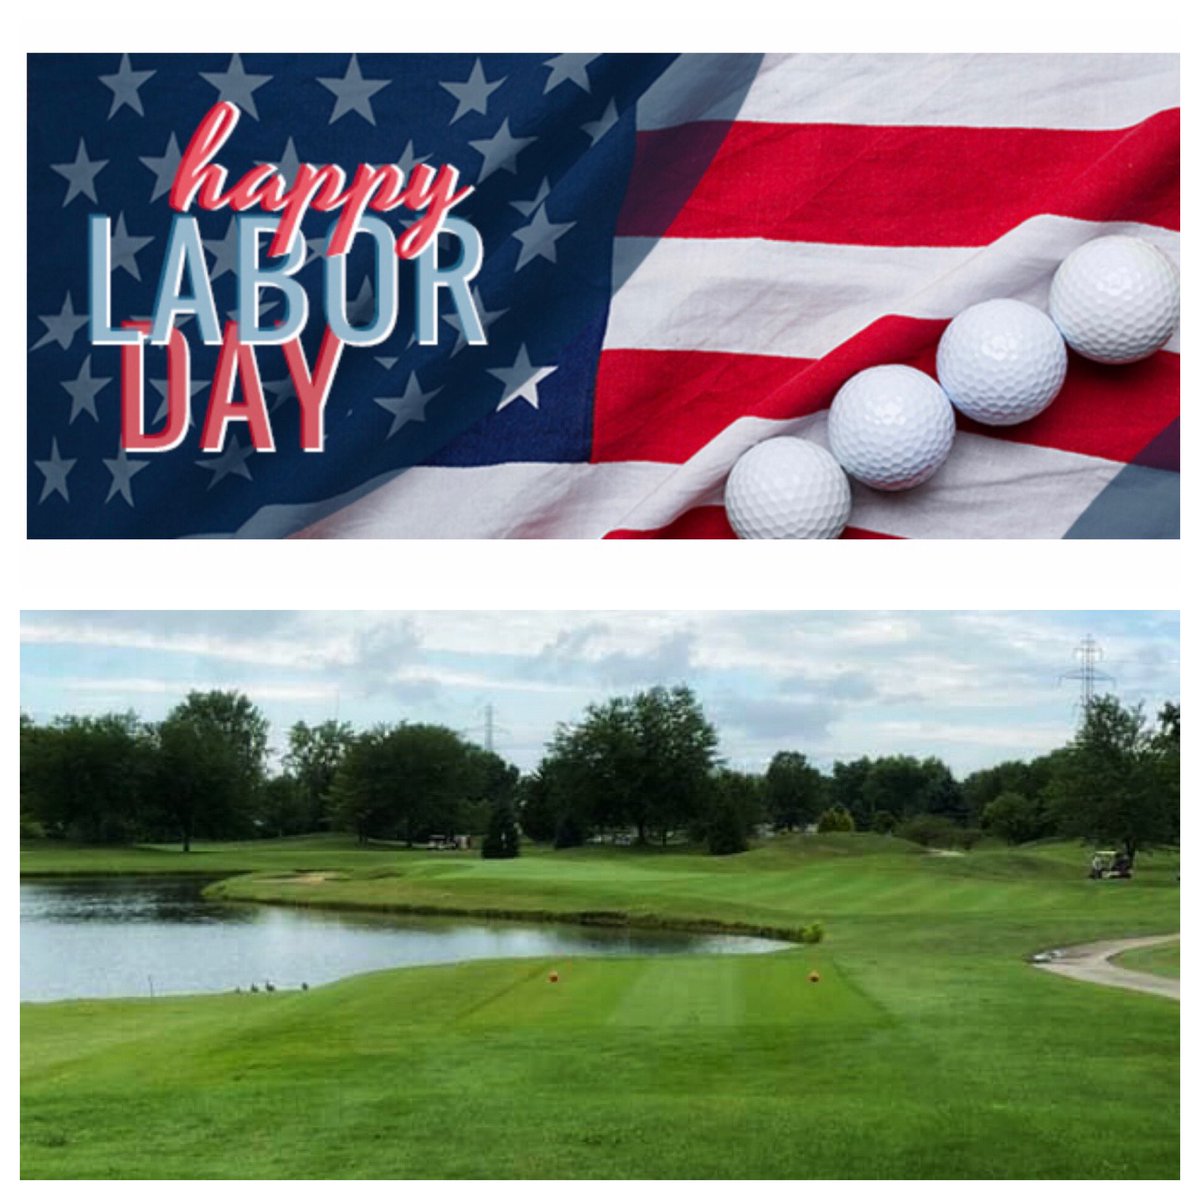 Call the golf shop or book your tee time online for this Labor Day Weekend!!!